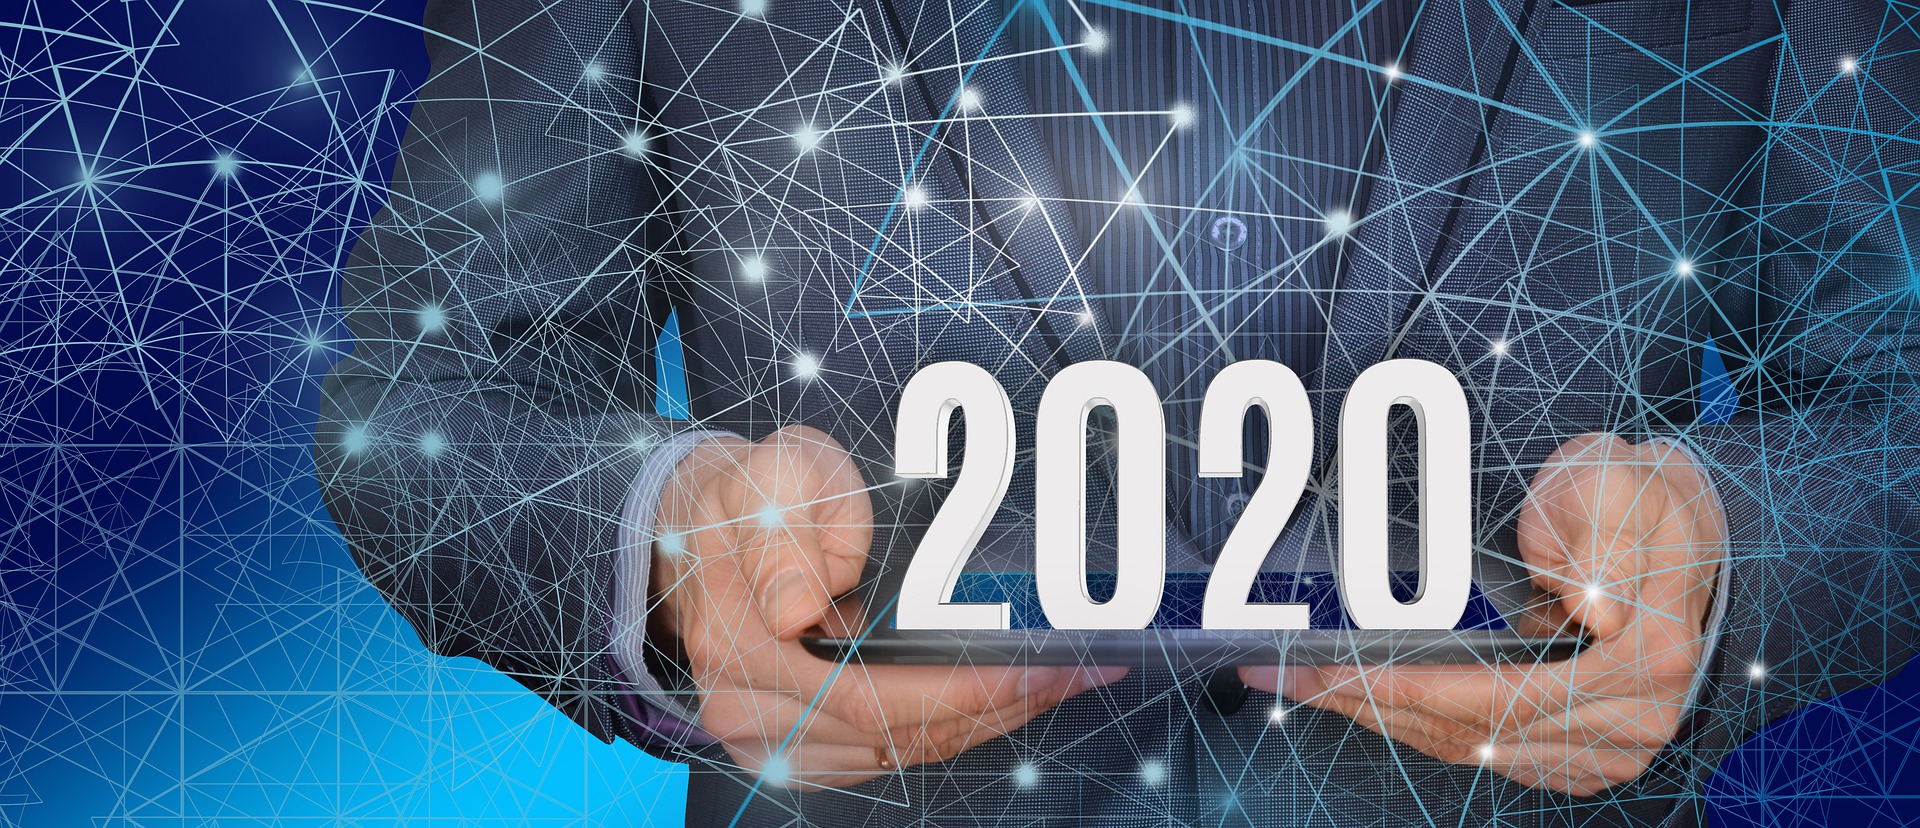 5 technological innovation trends to watch for in 2020